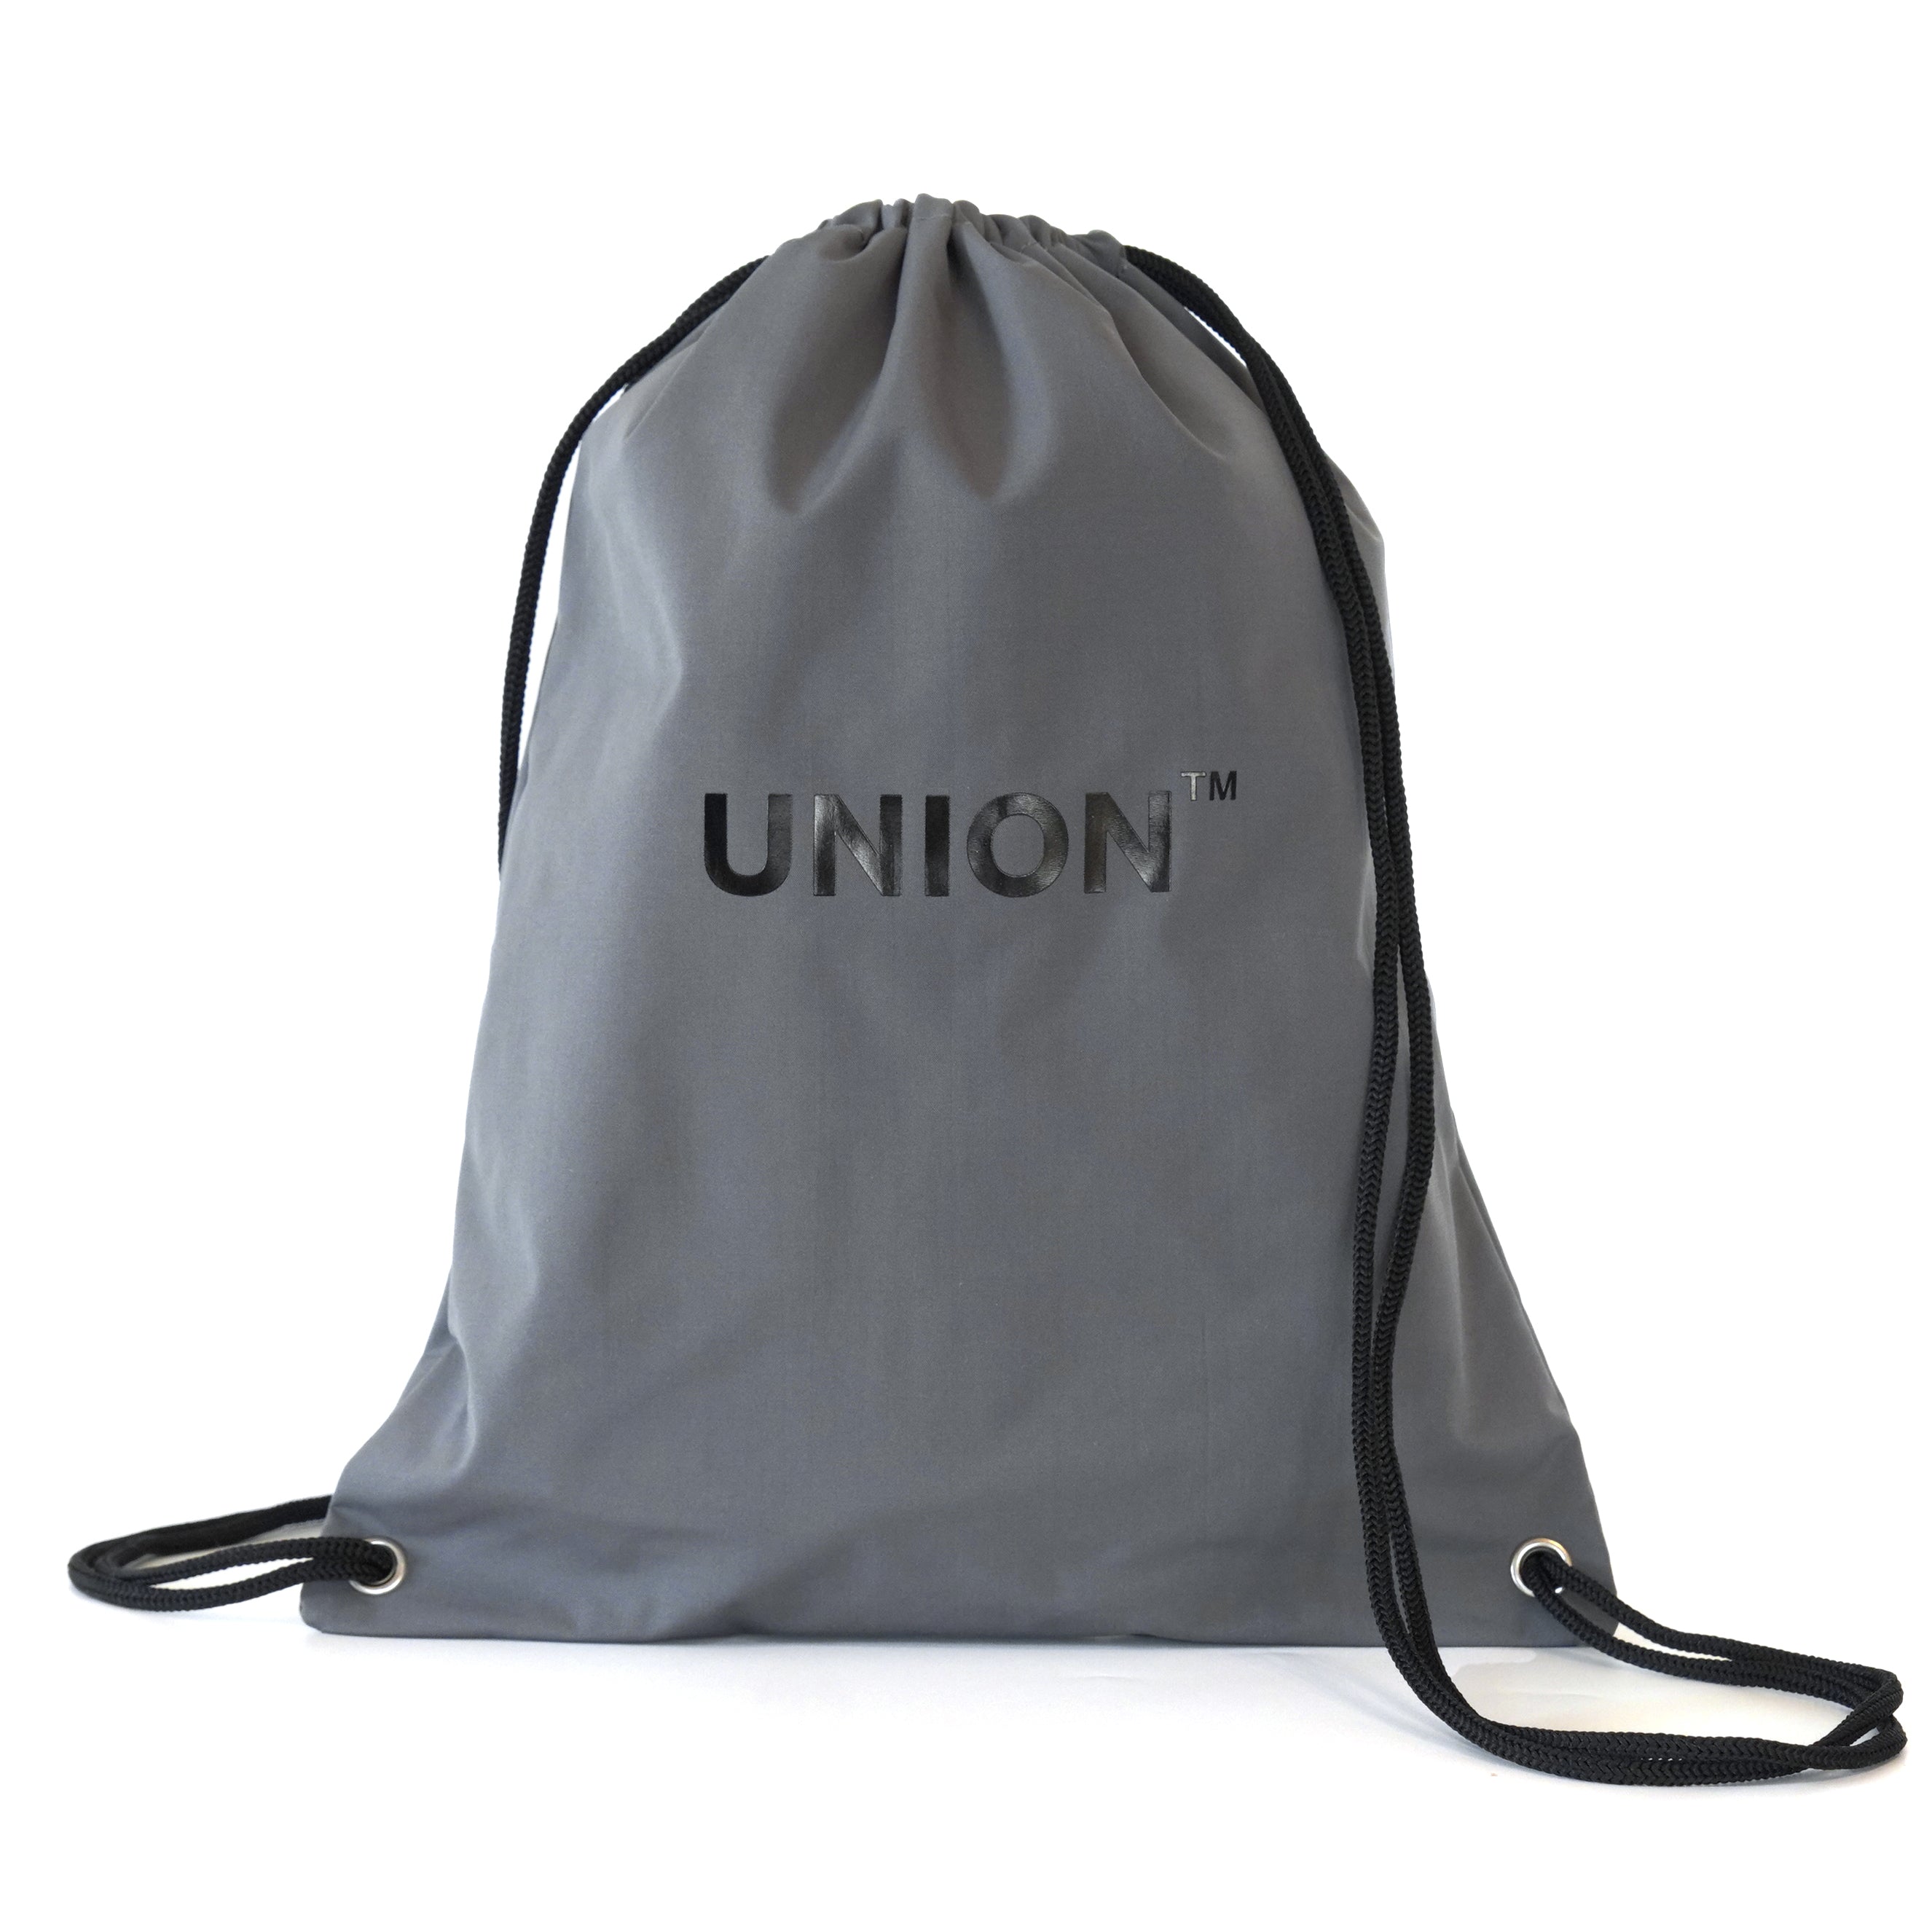 Union Backpack (Charcoal Grey) ユニオン バックパック